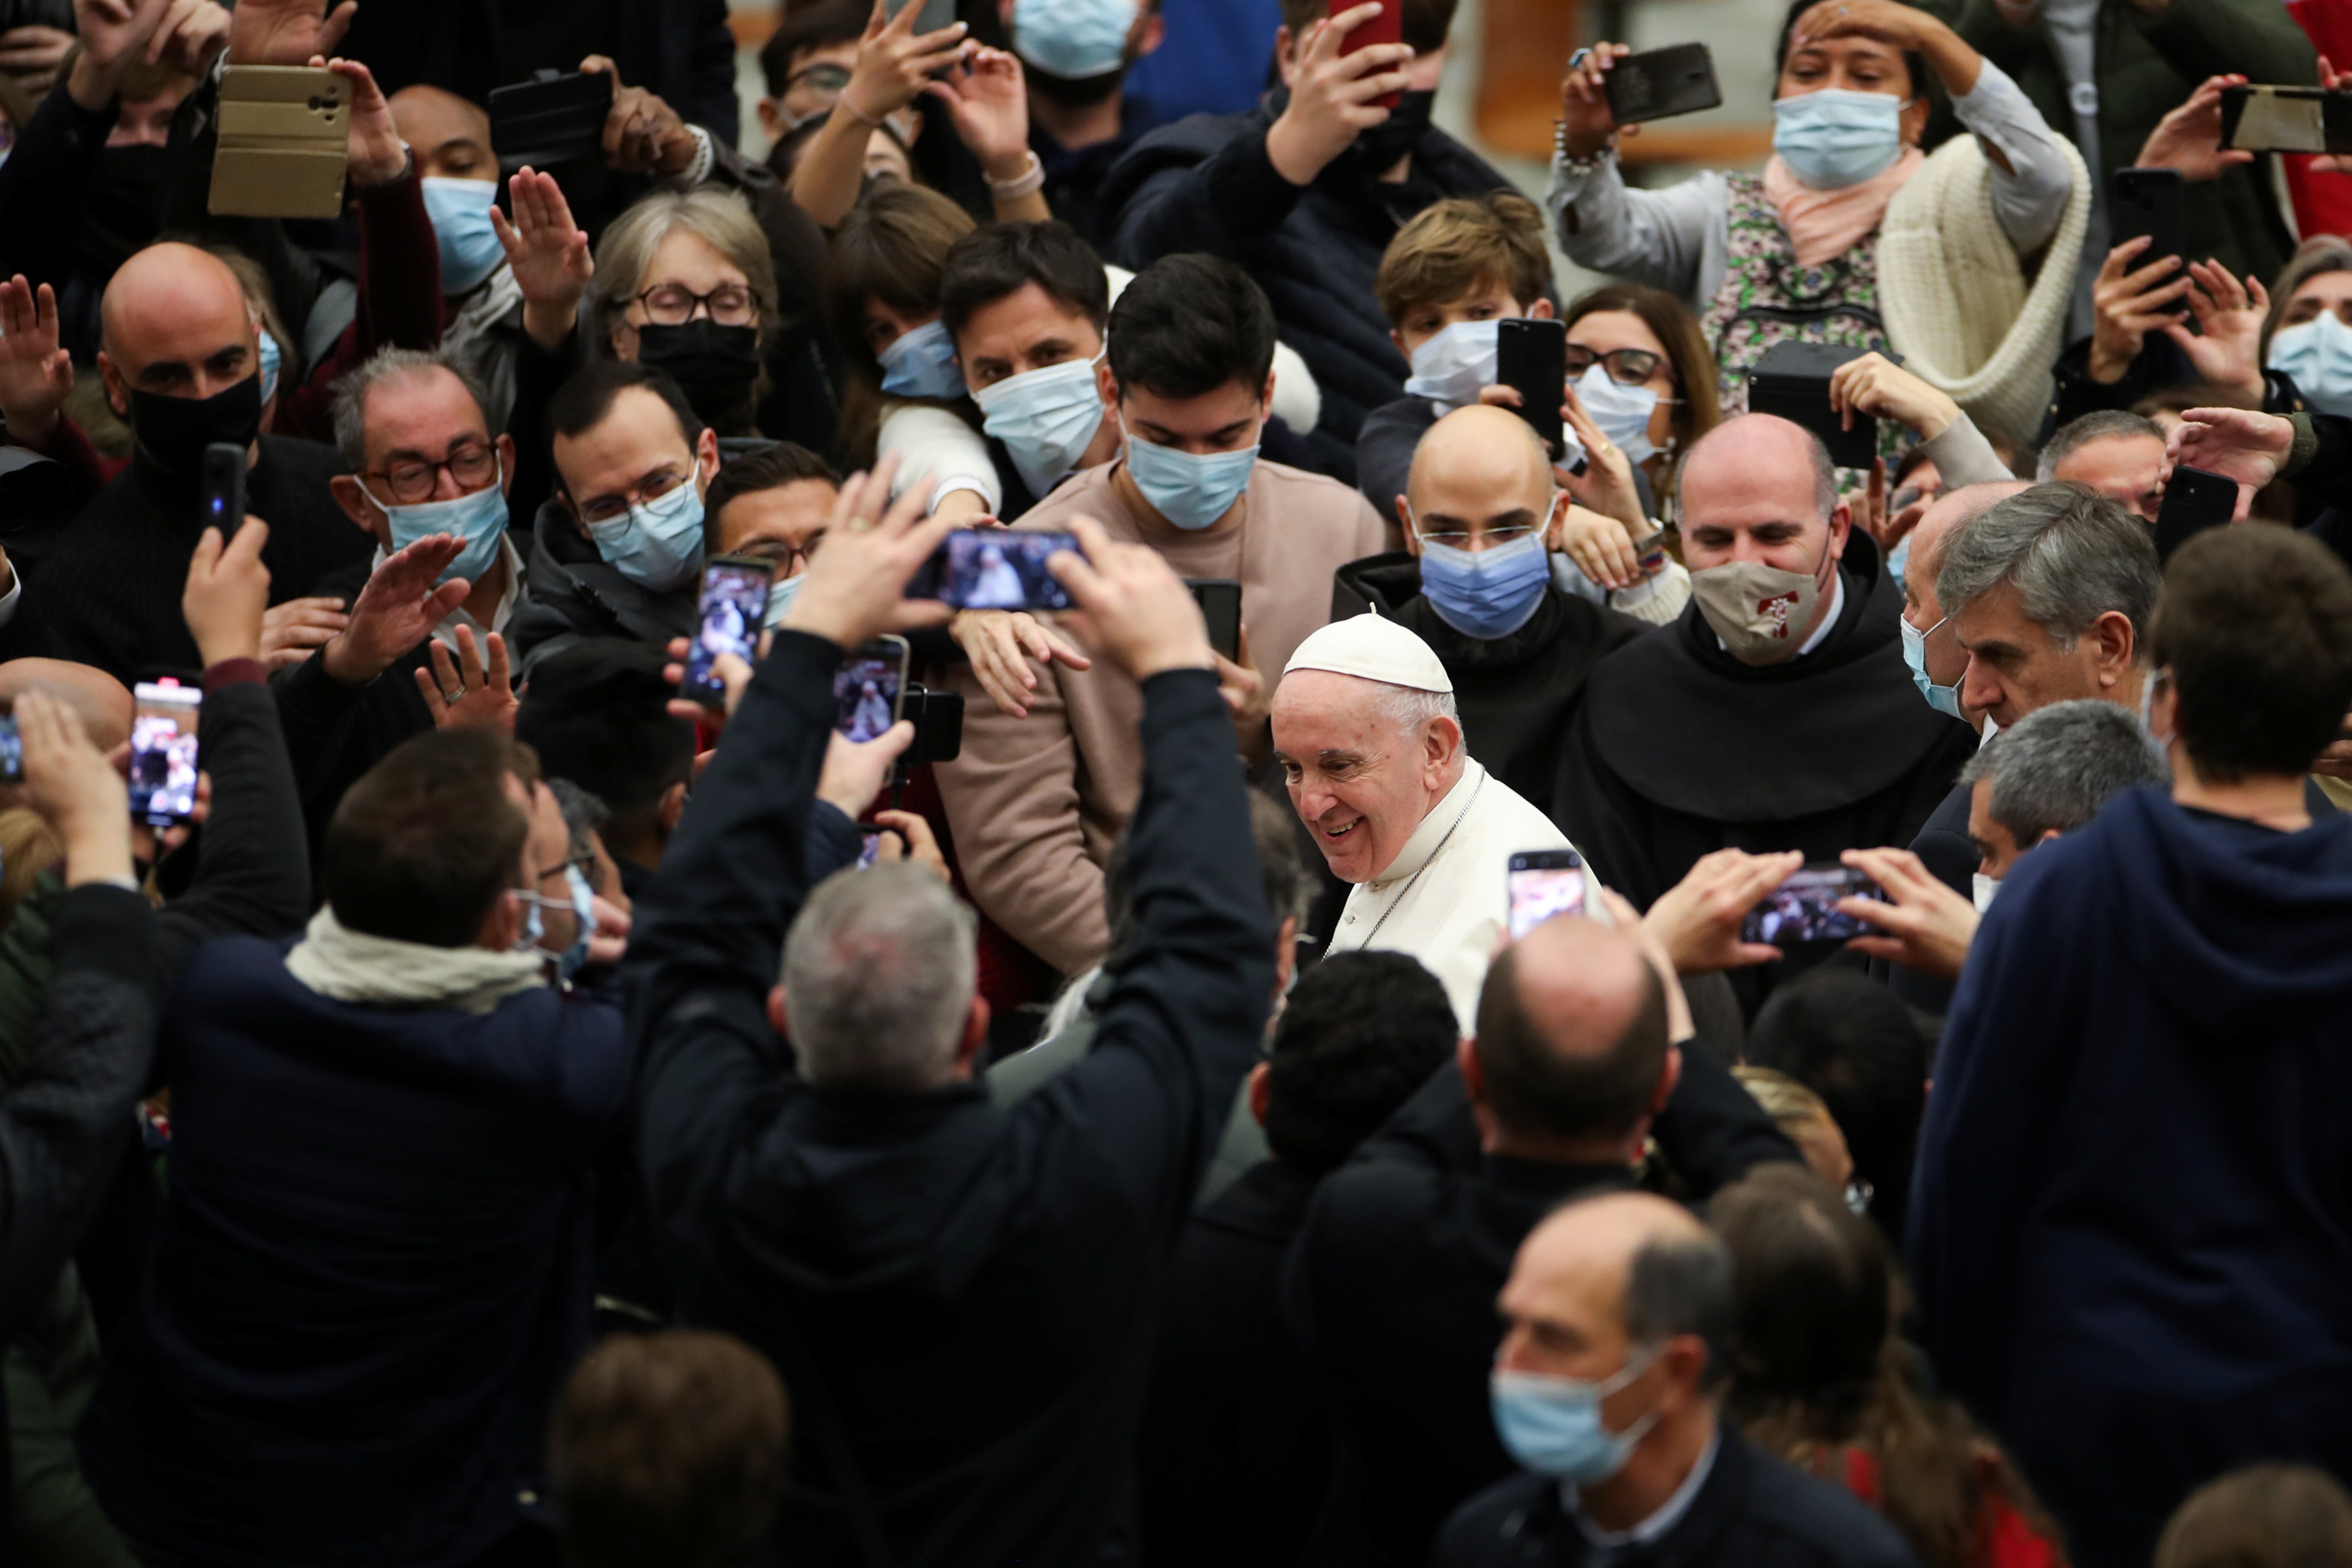 Pope Francis walks through the crowd after his general audience in Paul VI hall at the Vatican Dec. 1, 2021. (CNS photo/Yara Nardi, Reuters)